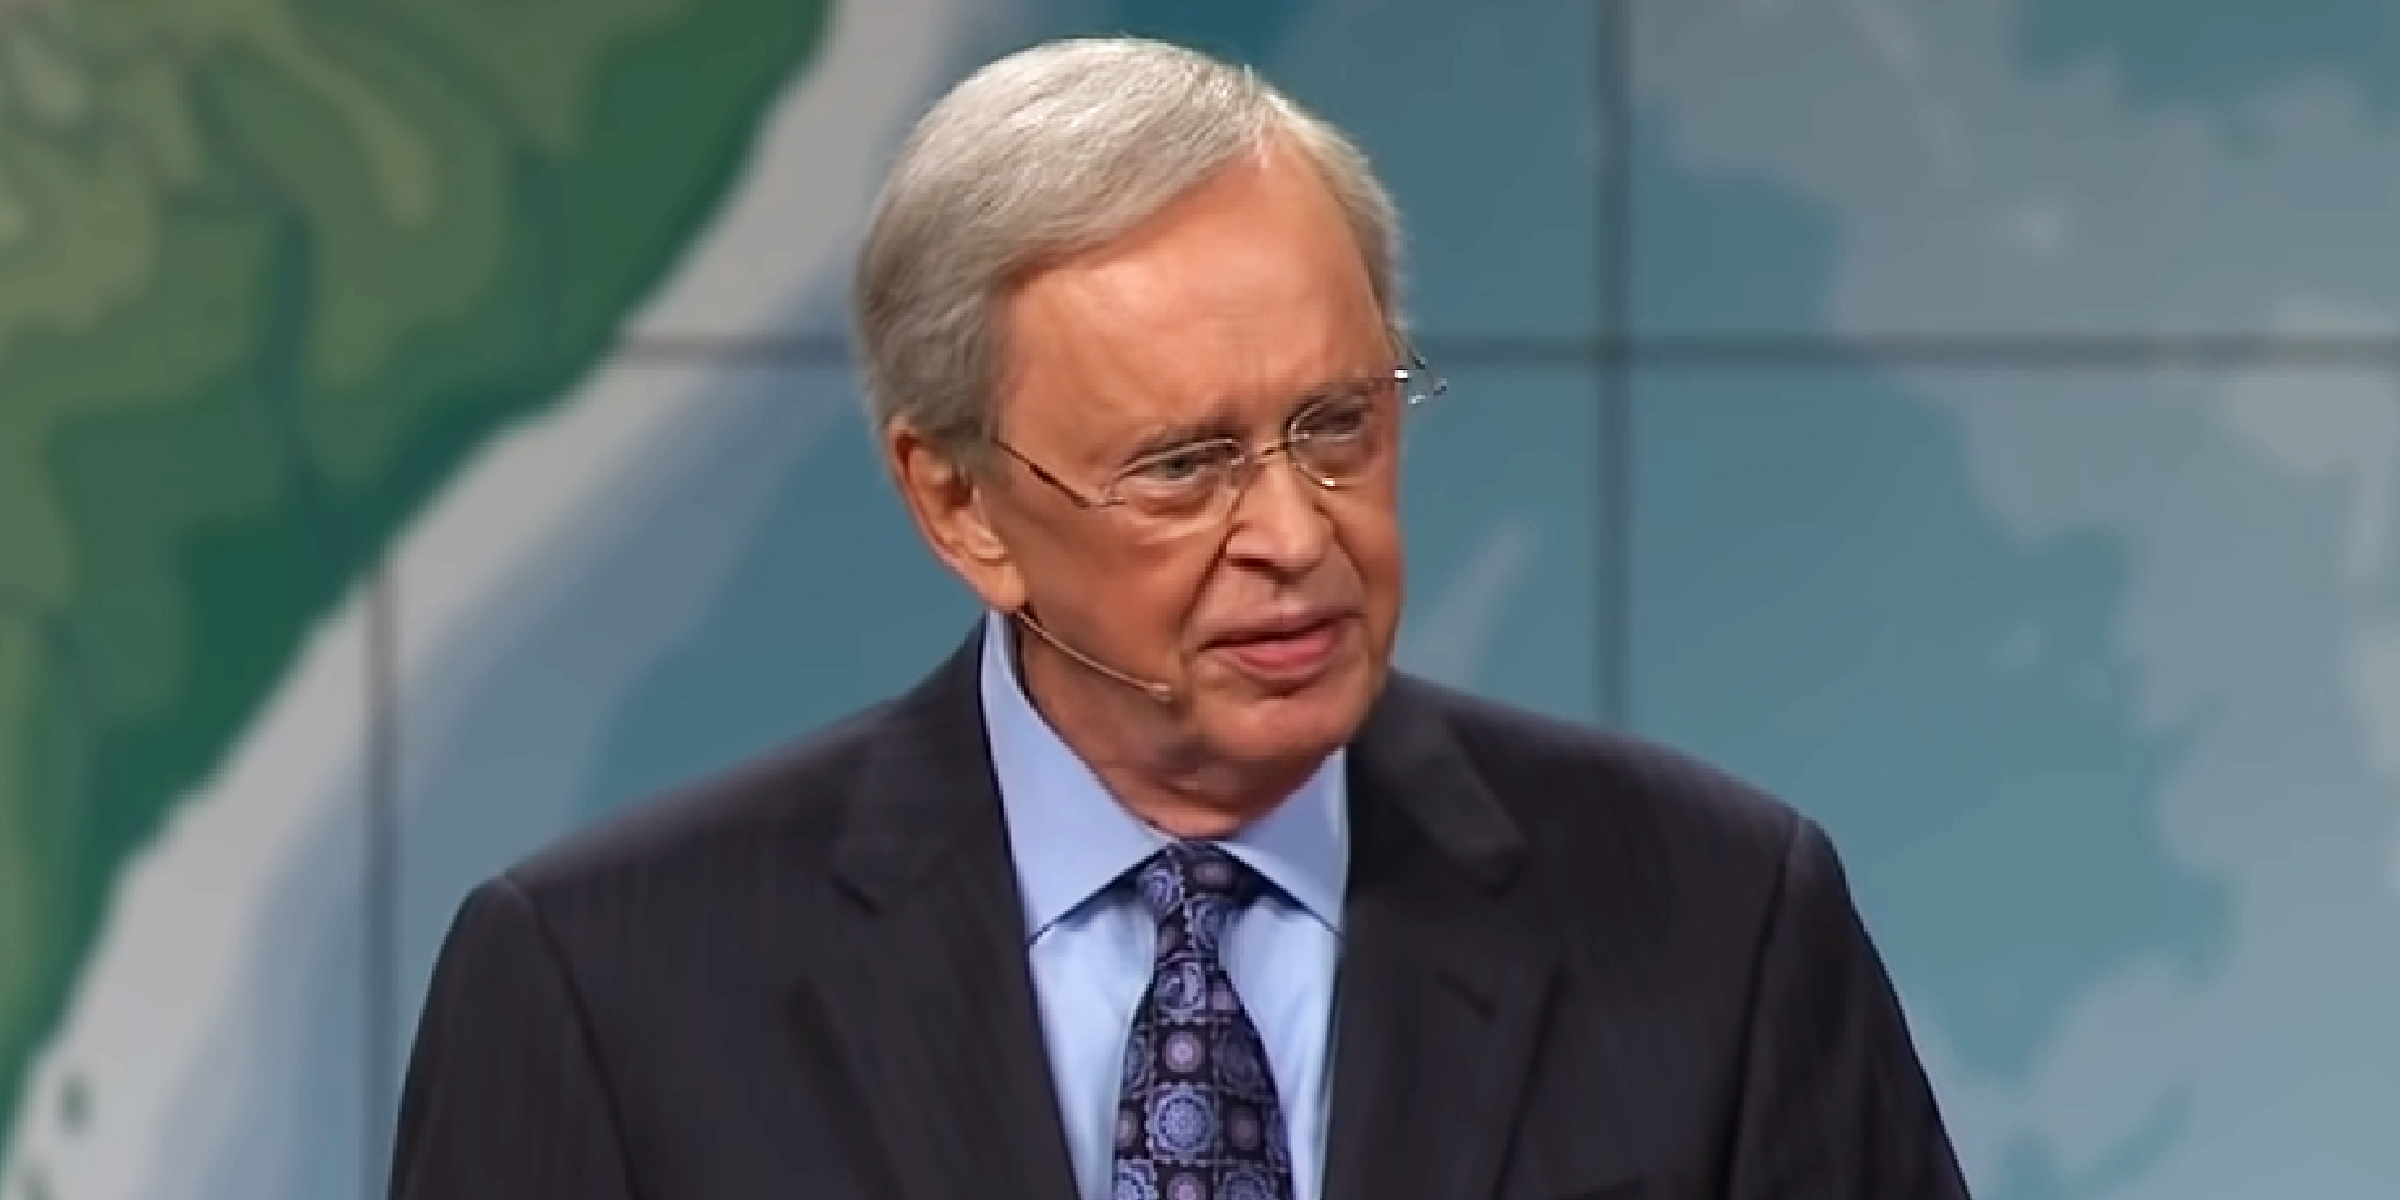 Charles Stanley | Source: youtube.com/InTouchMinistries